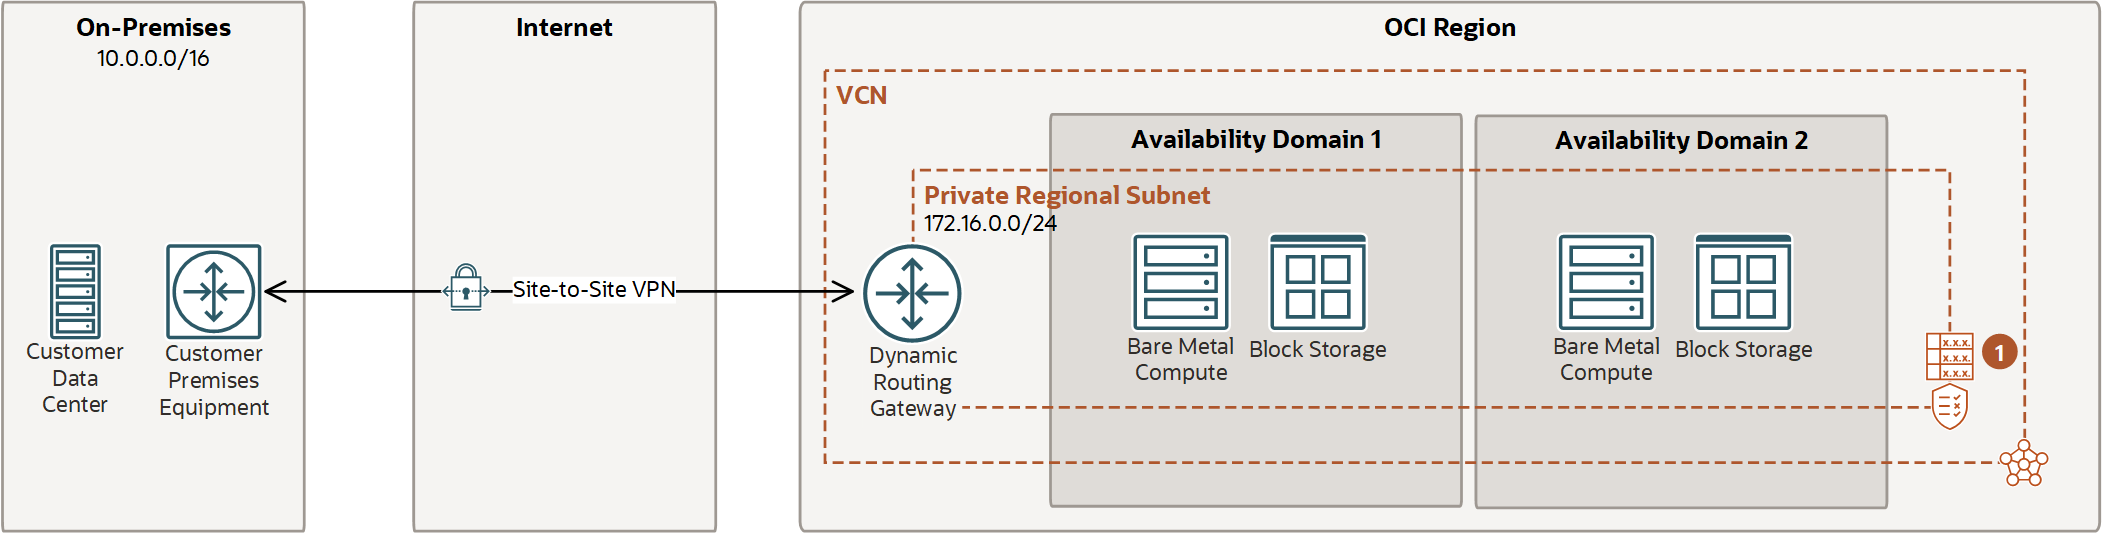 This image shows the components of Site-to-Site VPN